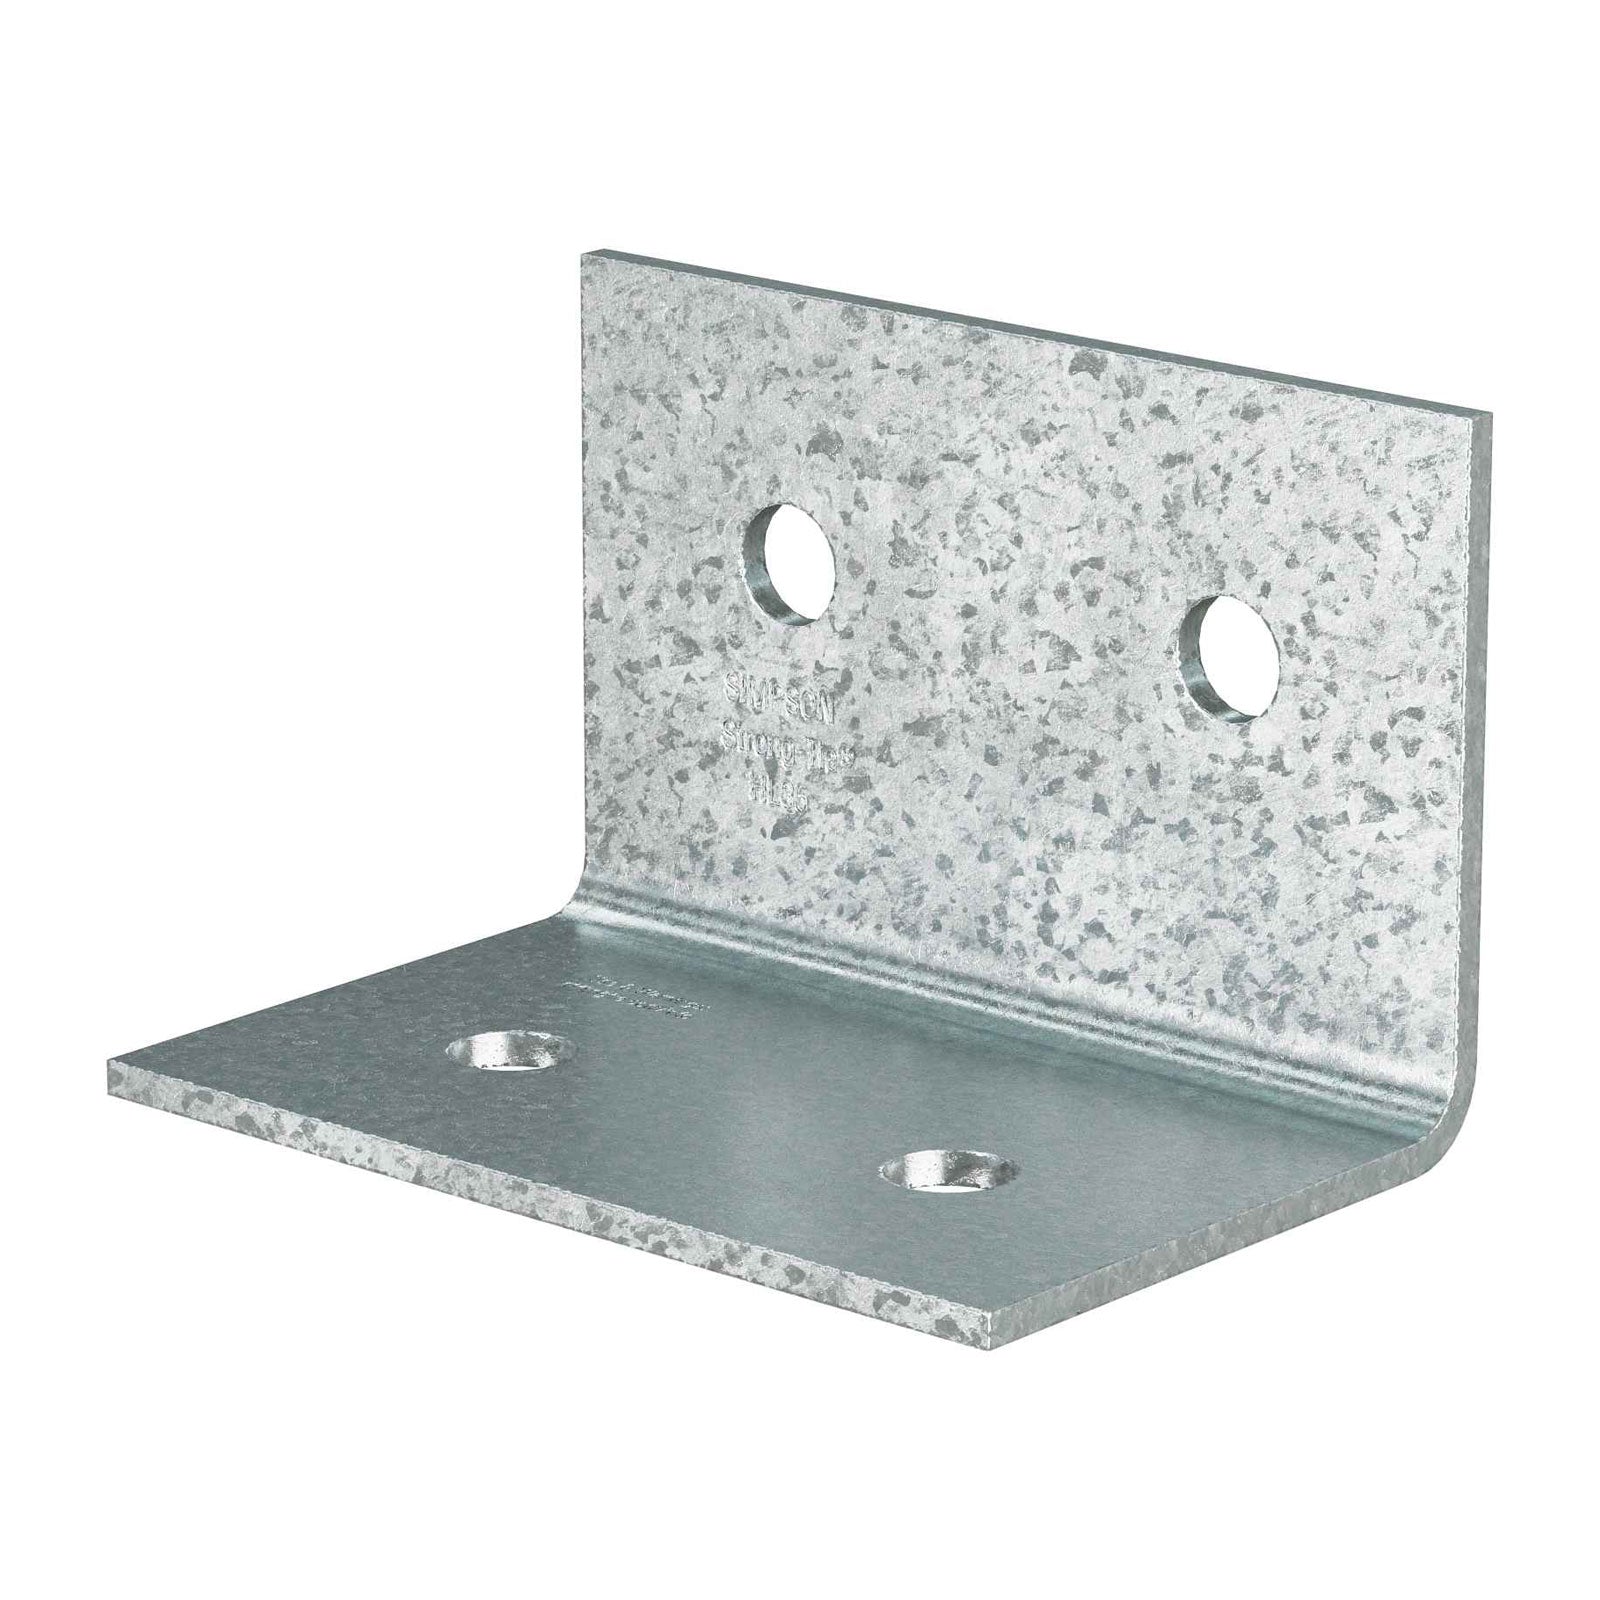 Simpson HL35HDG-5/8 Heavy L-Shaped Angle with 5/8" Bolt Holes - Hot Dip Galvanized